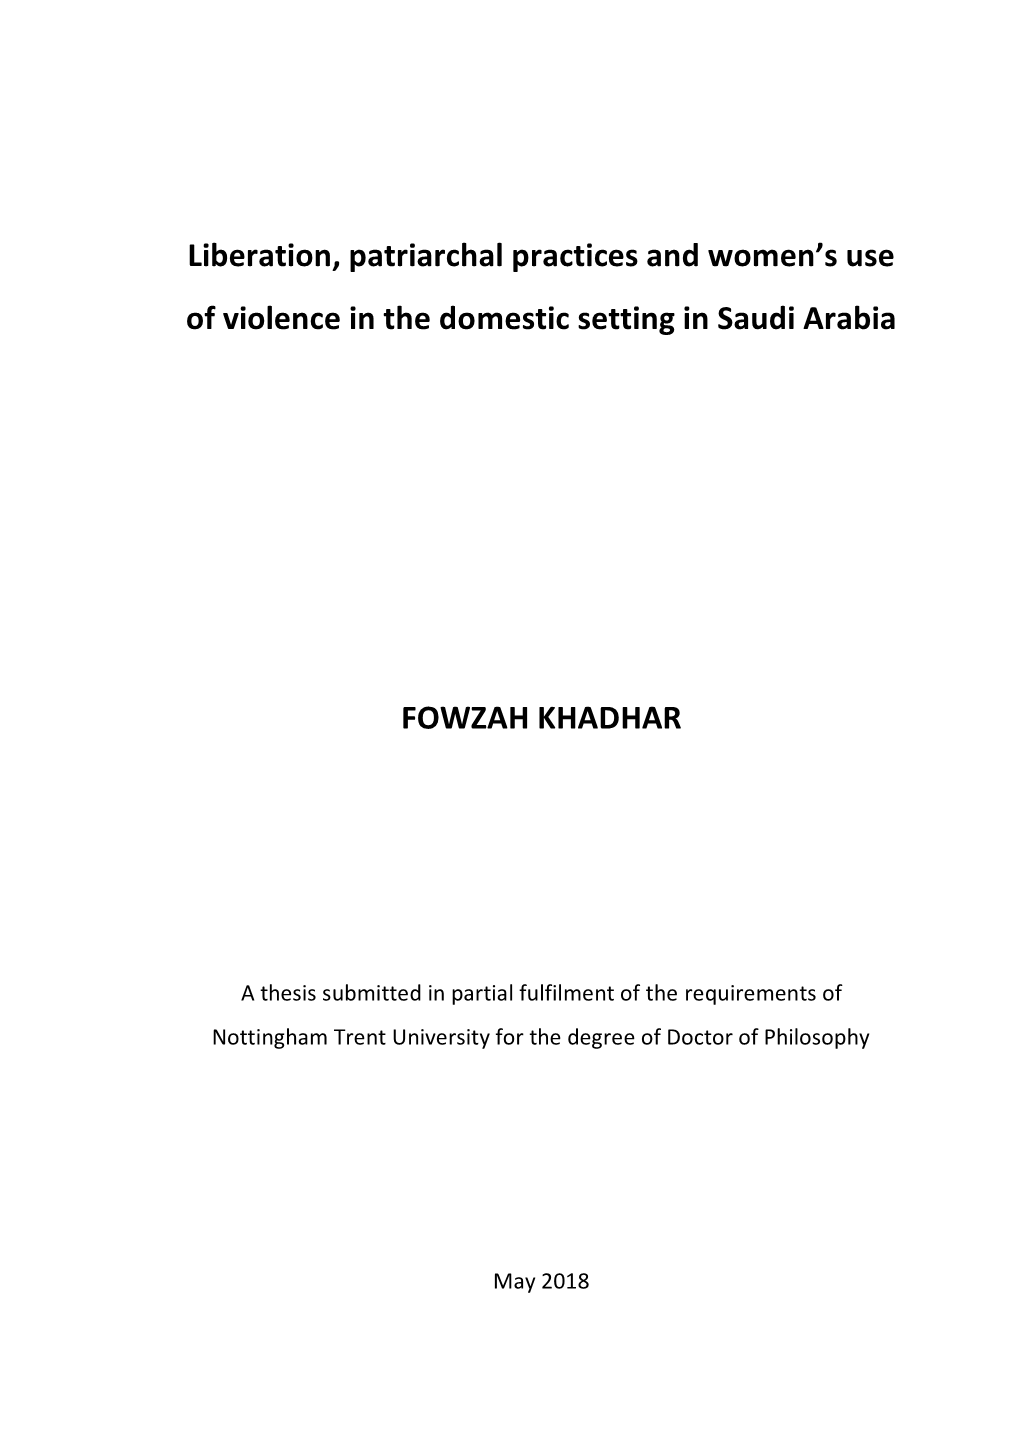 Liberation, Patriarchal Practices and Women's Use of Violence in The